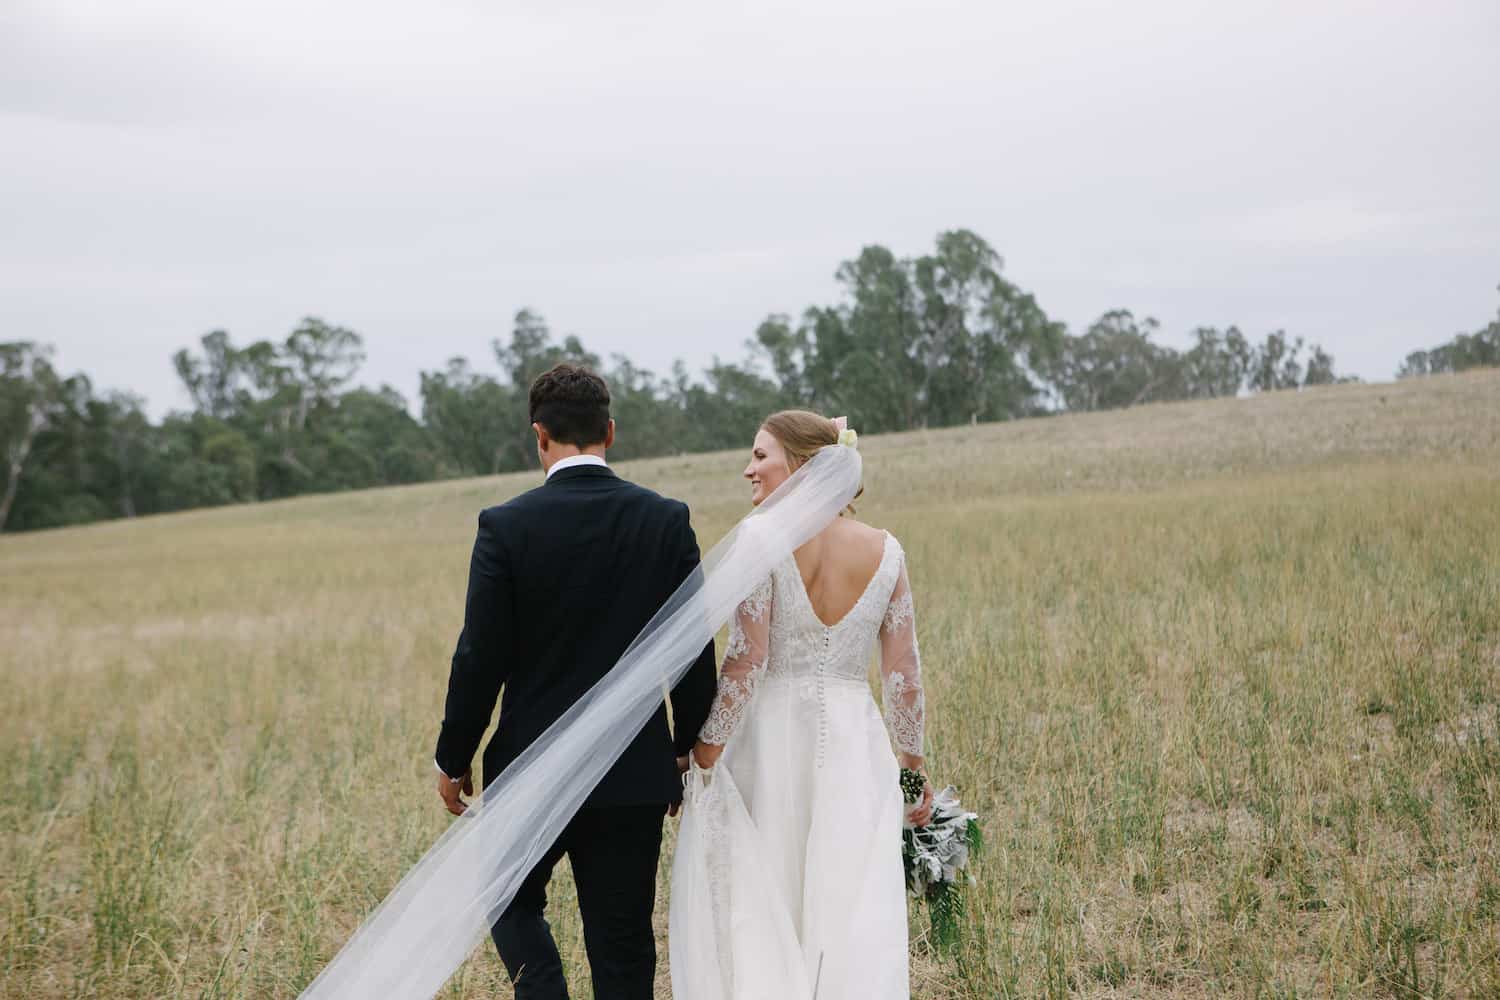 Killeen Station Barn Wedding Melbourne Mia and Brents Wedding Madeleine Chiller Photography 4